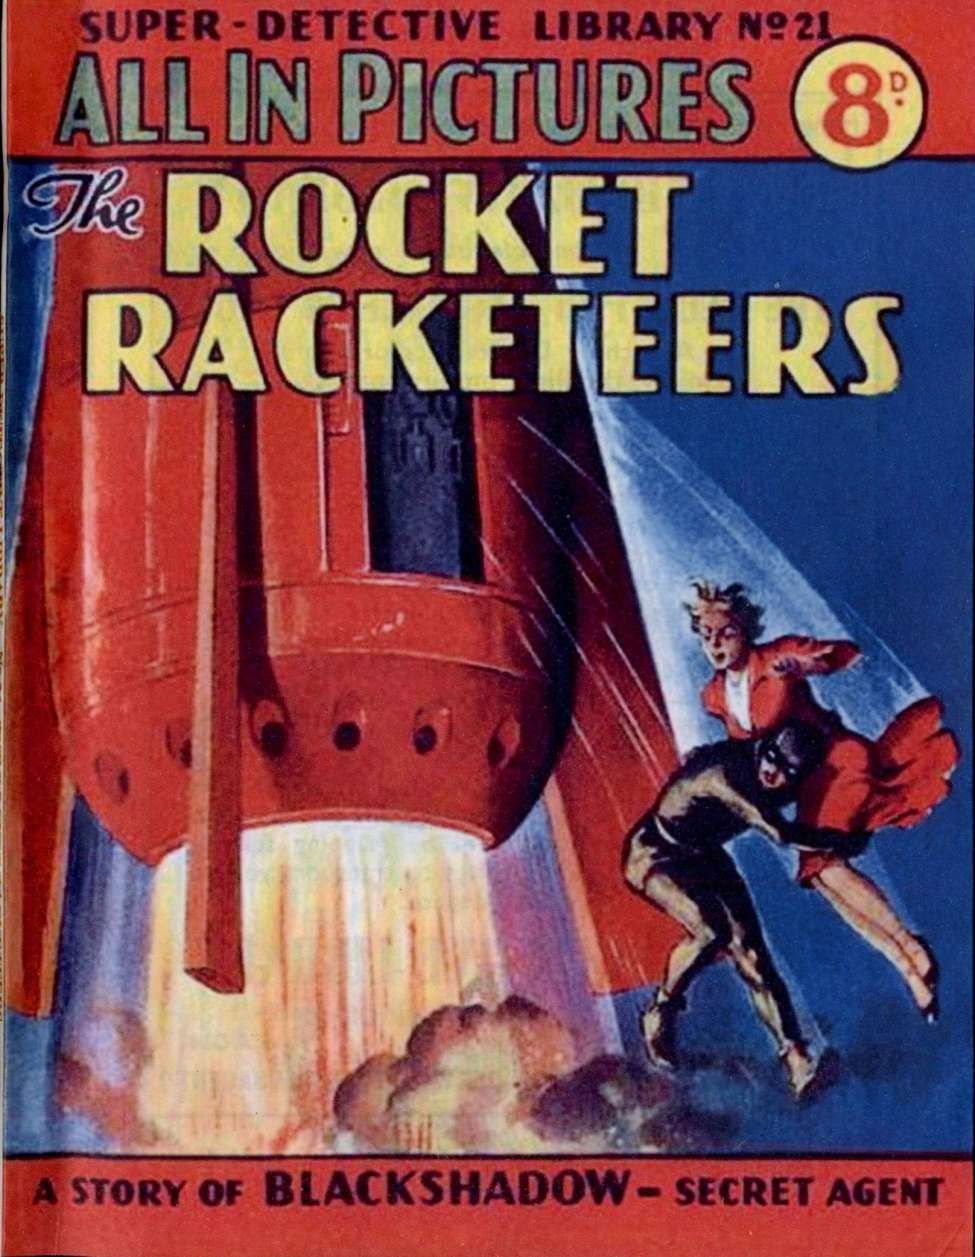 Book Cover For Super Detective Library 21 - The Rocket Racketeers